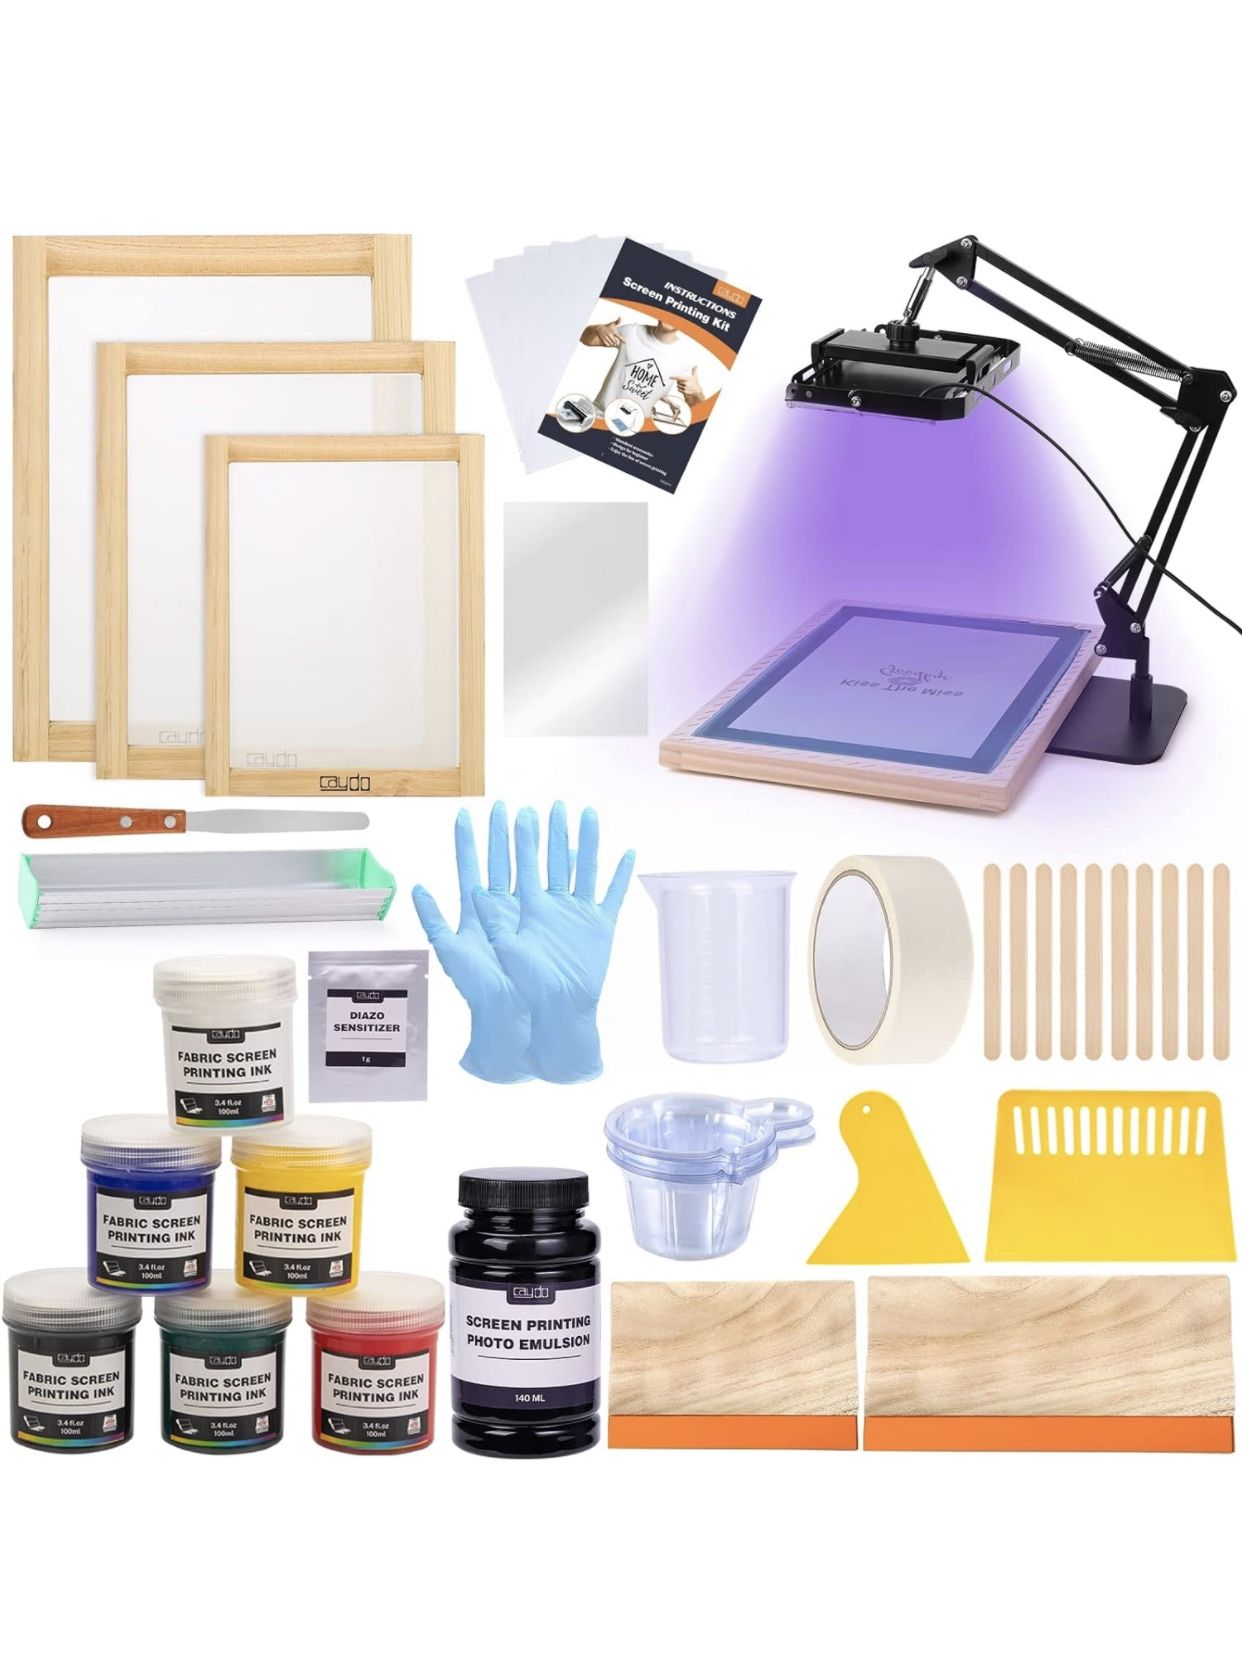 Caydo 60 Pieces Screen Printing Kit with 50W LED UV Exposure Screen Printing Light, 6 Color Screen Printing Ink, Screen Printing Photo Emulsion, Emuls